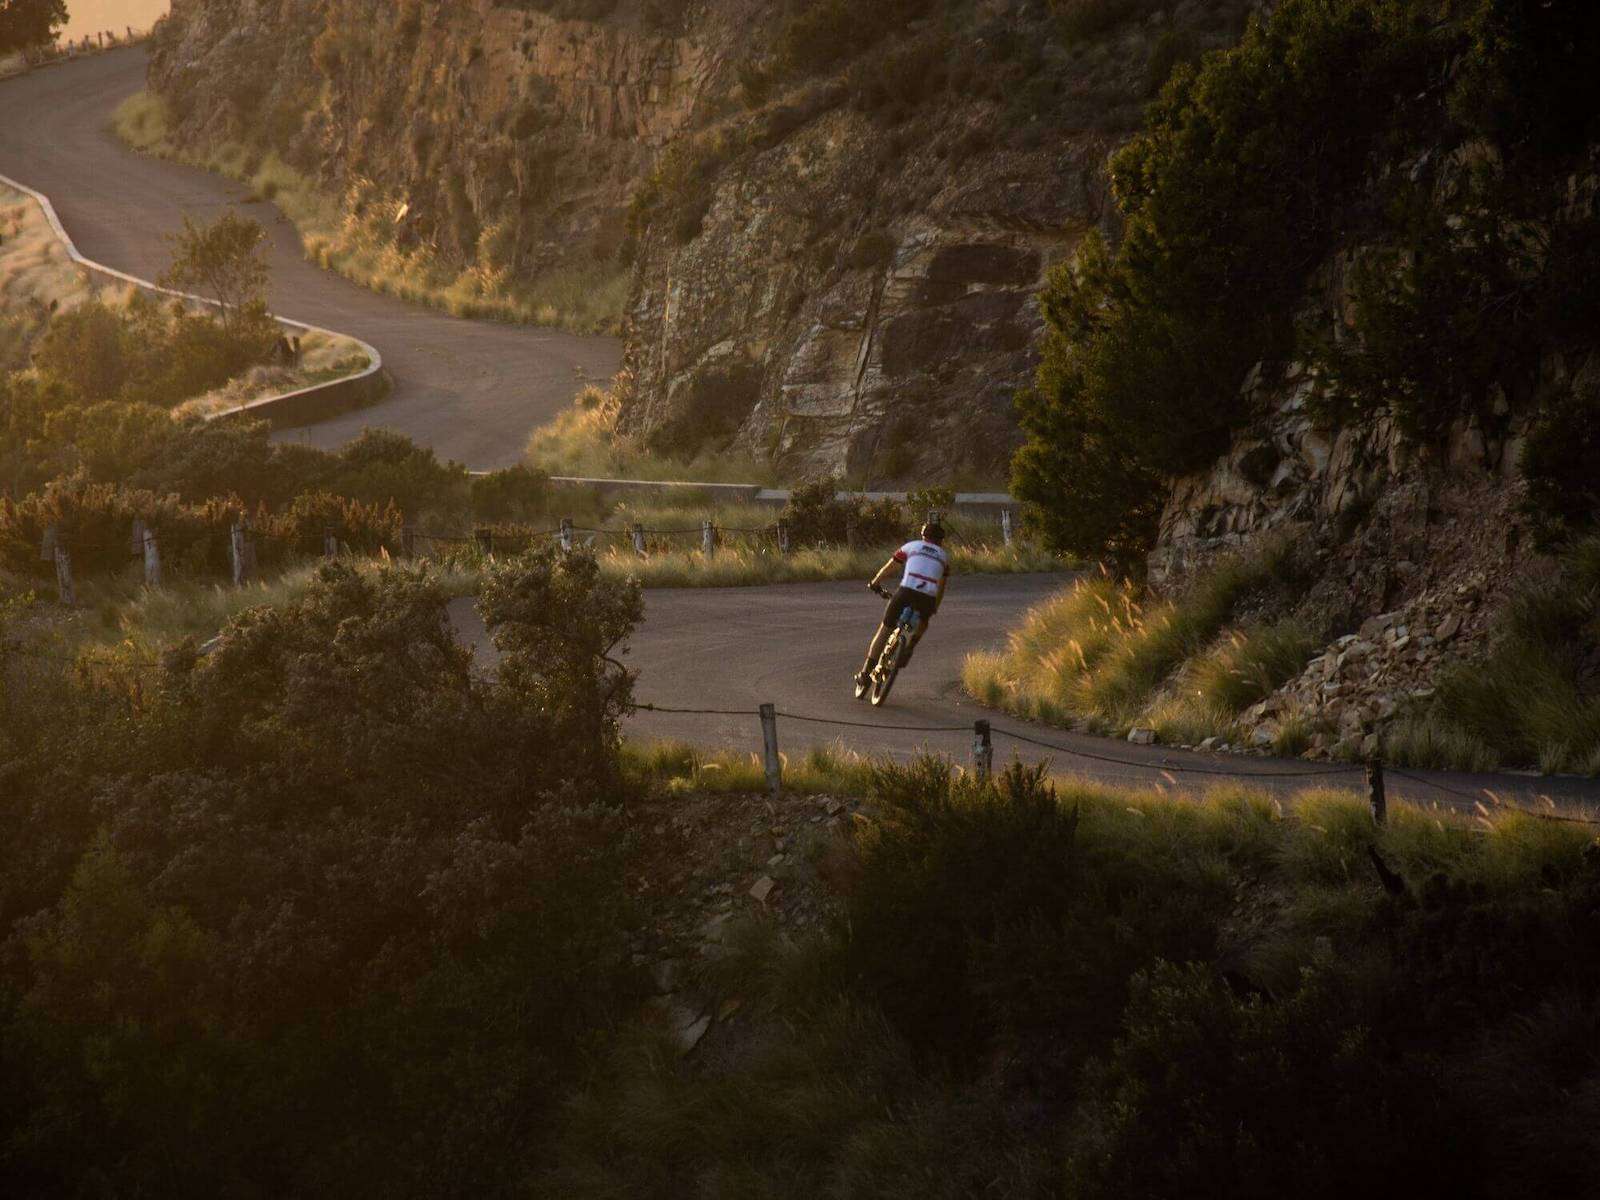 Road cyclist on empty, winding road with golden sunlight of sunset